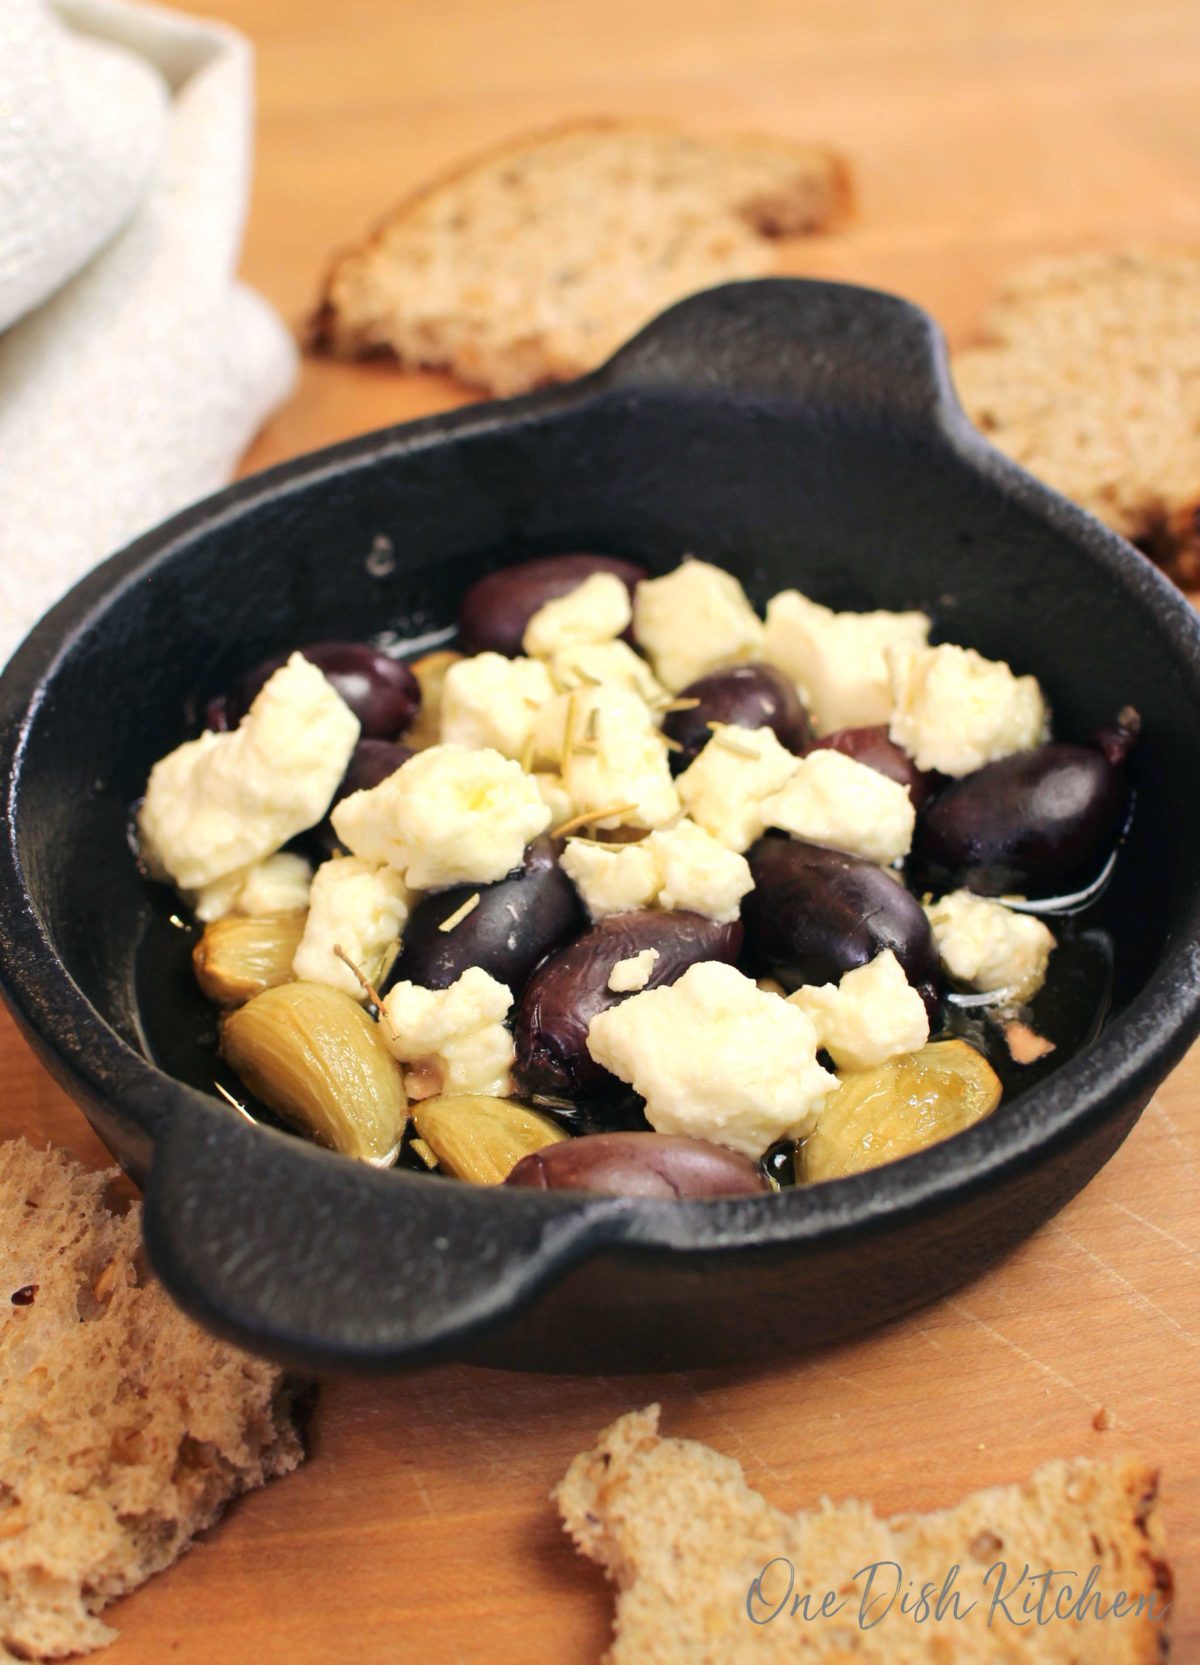 a bowl of baked feta with kalamata olives, olive oil, and garlic on a brown cutting board next to torn pieces of brown bread.